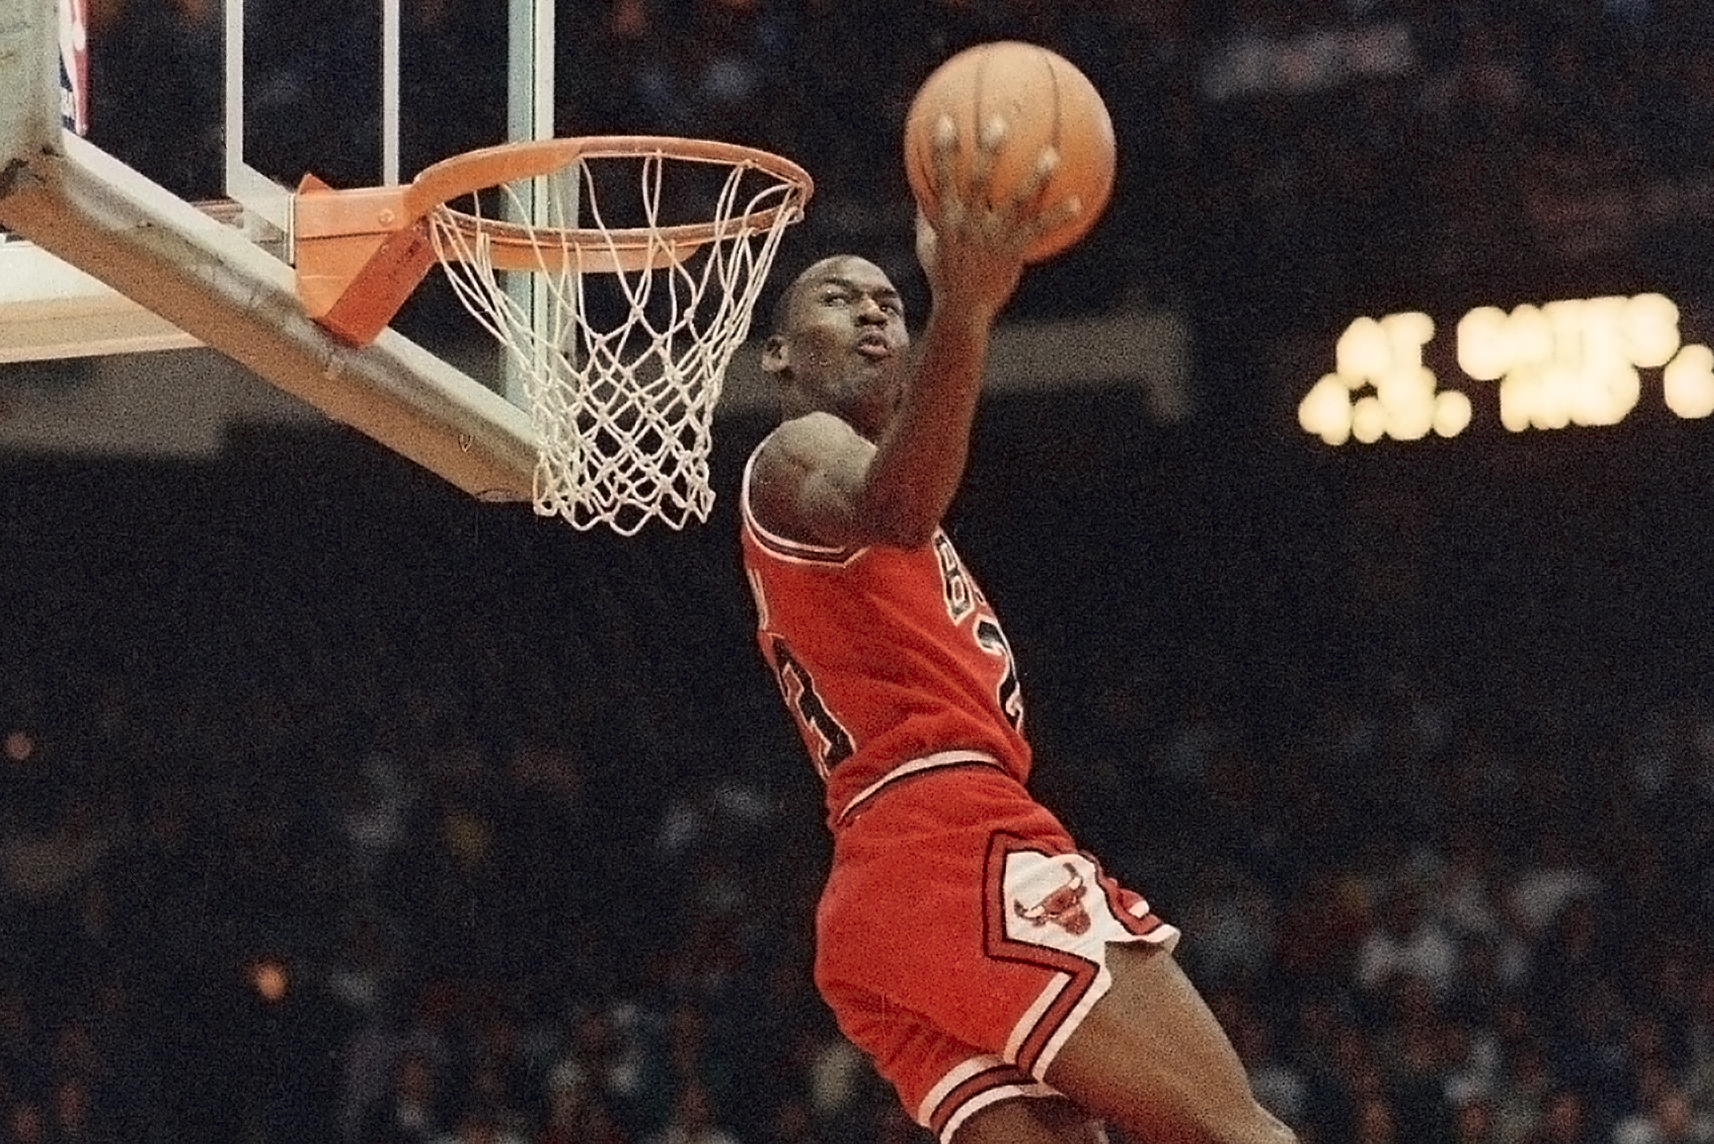 Michael Jordan and his failed deal: More than a decade to sell his